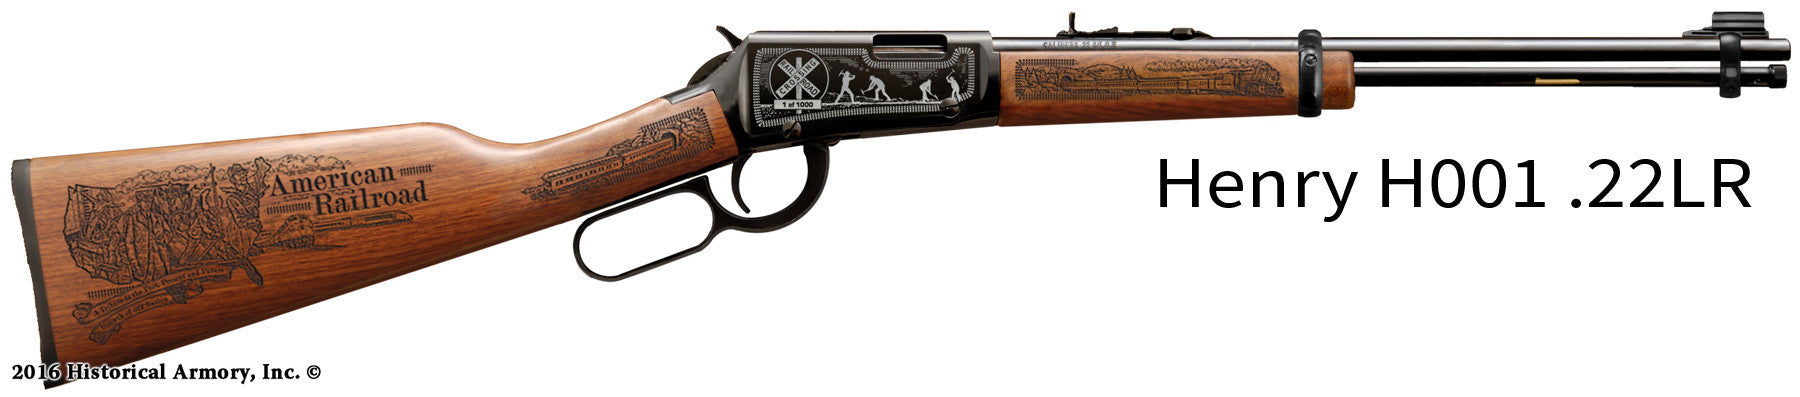 American Railroad Engraved Henry Rifle